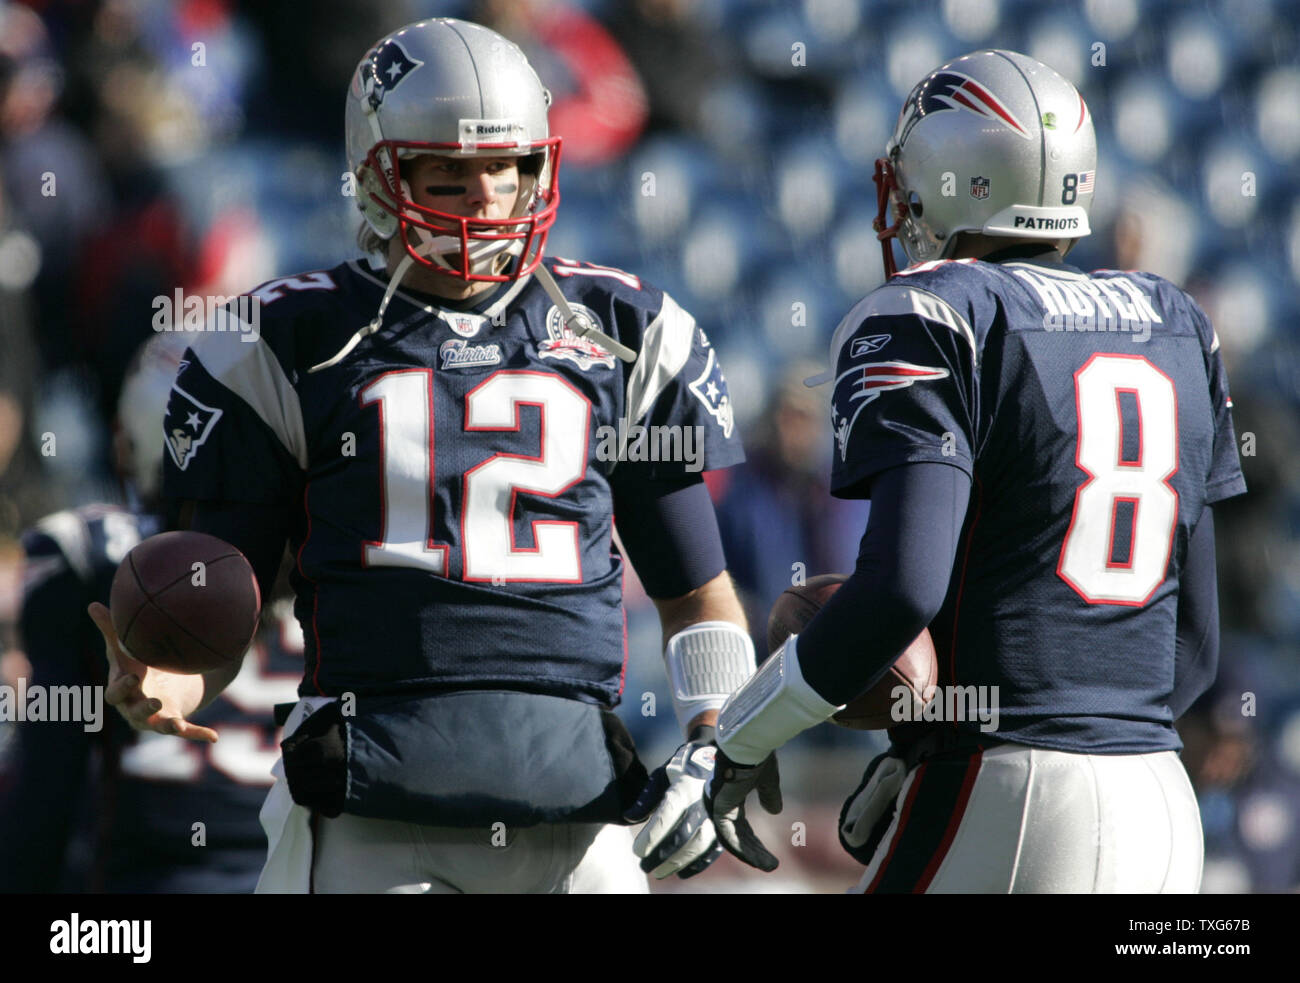 New England Patriots quarterback Tom Brady (12) chats with quarterback Brian Hoyer (8) during warm ups before the game against the Baltimore Ravens at Gillette Stadium in Foxboro, Massachusetts on January 10, 2010.    UPI/Matthew Healey Stock Photo